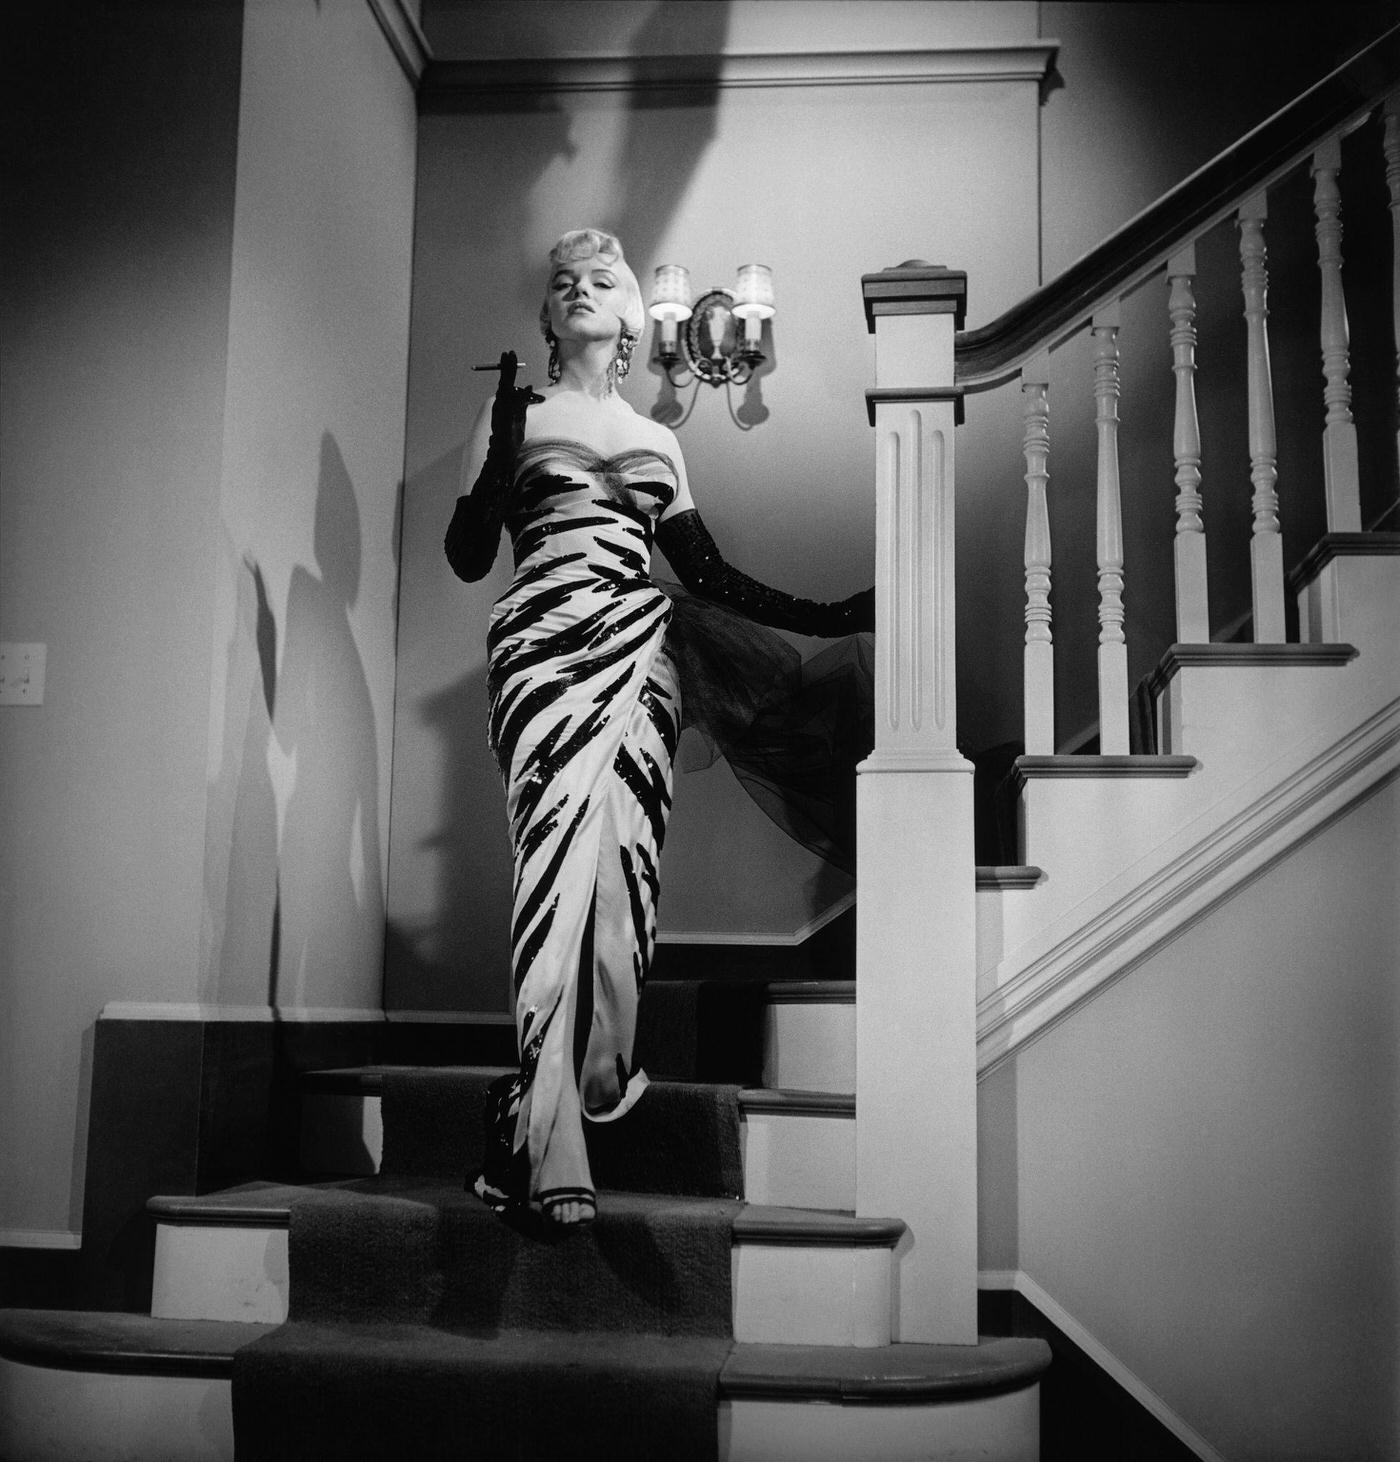 Marilyn Monroe descends a staircase wearing a tiger-striped strapless dress in 1954 during the filming of "The Seven Year Itch"